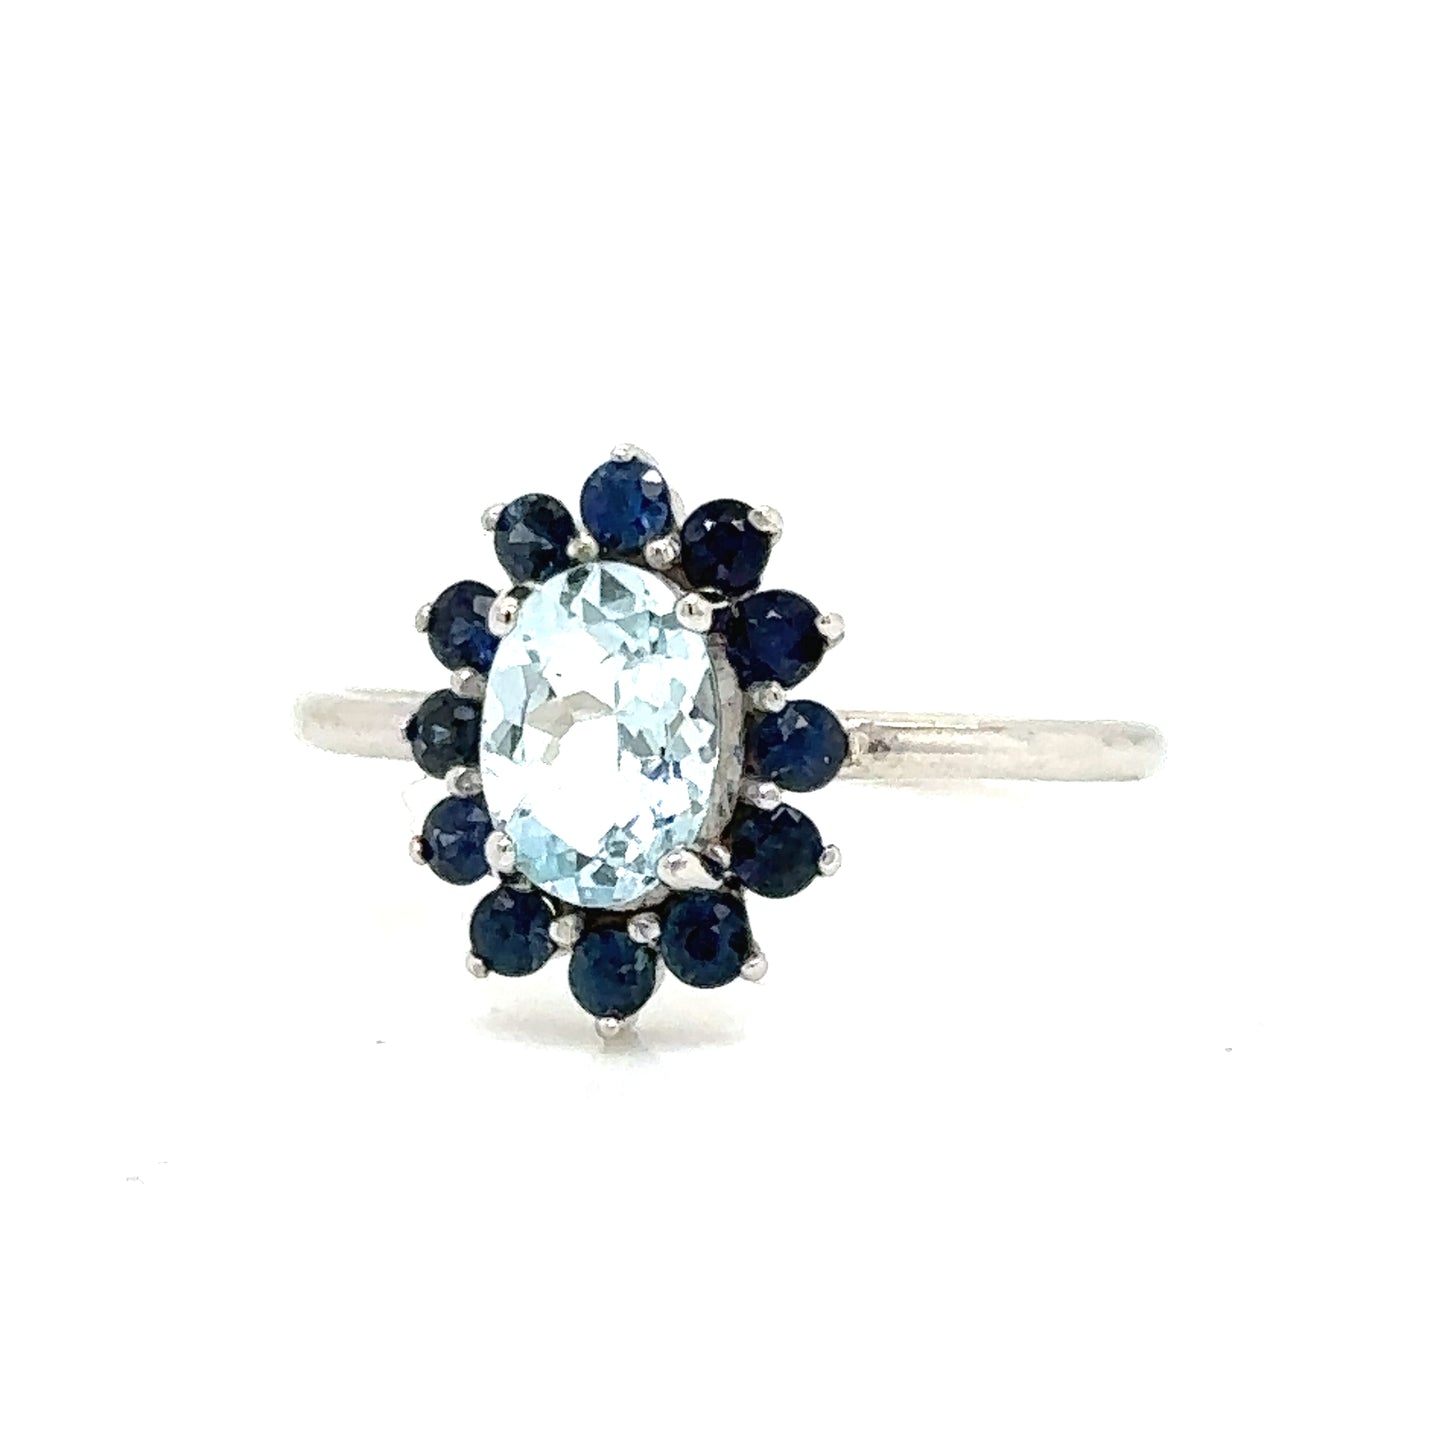 IMMEDIATE DELIVERY / "Kate" Aquamarine ring with sapphire halo / 14k white gold / Size 6